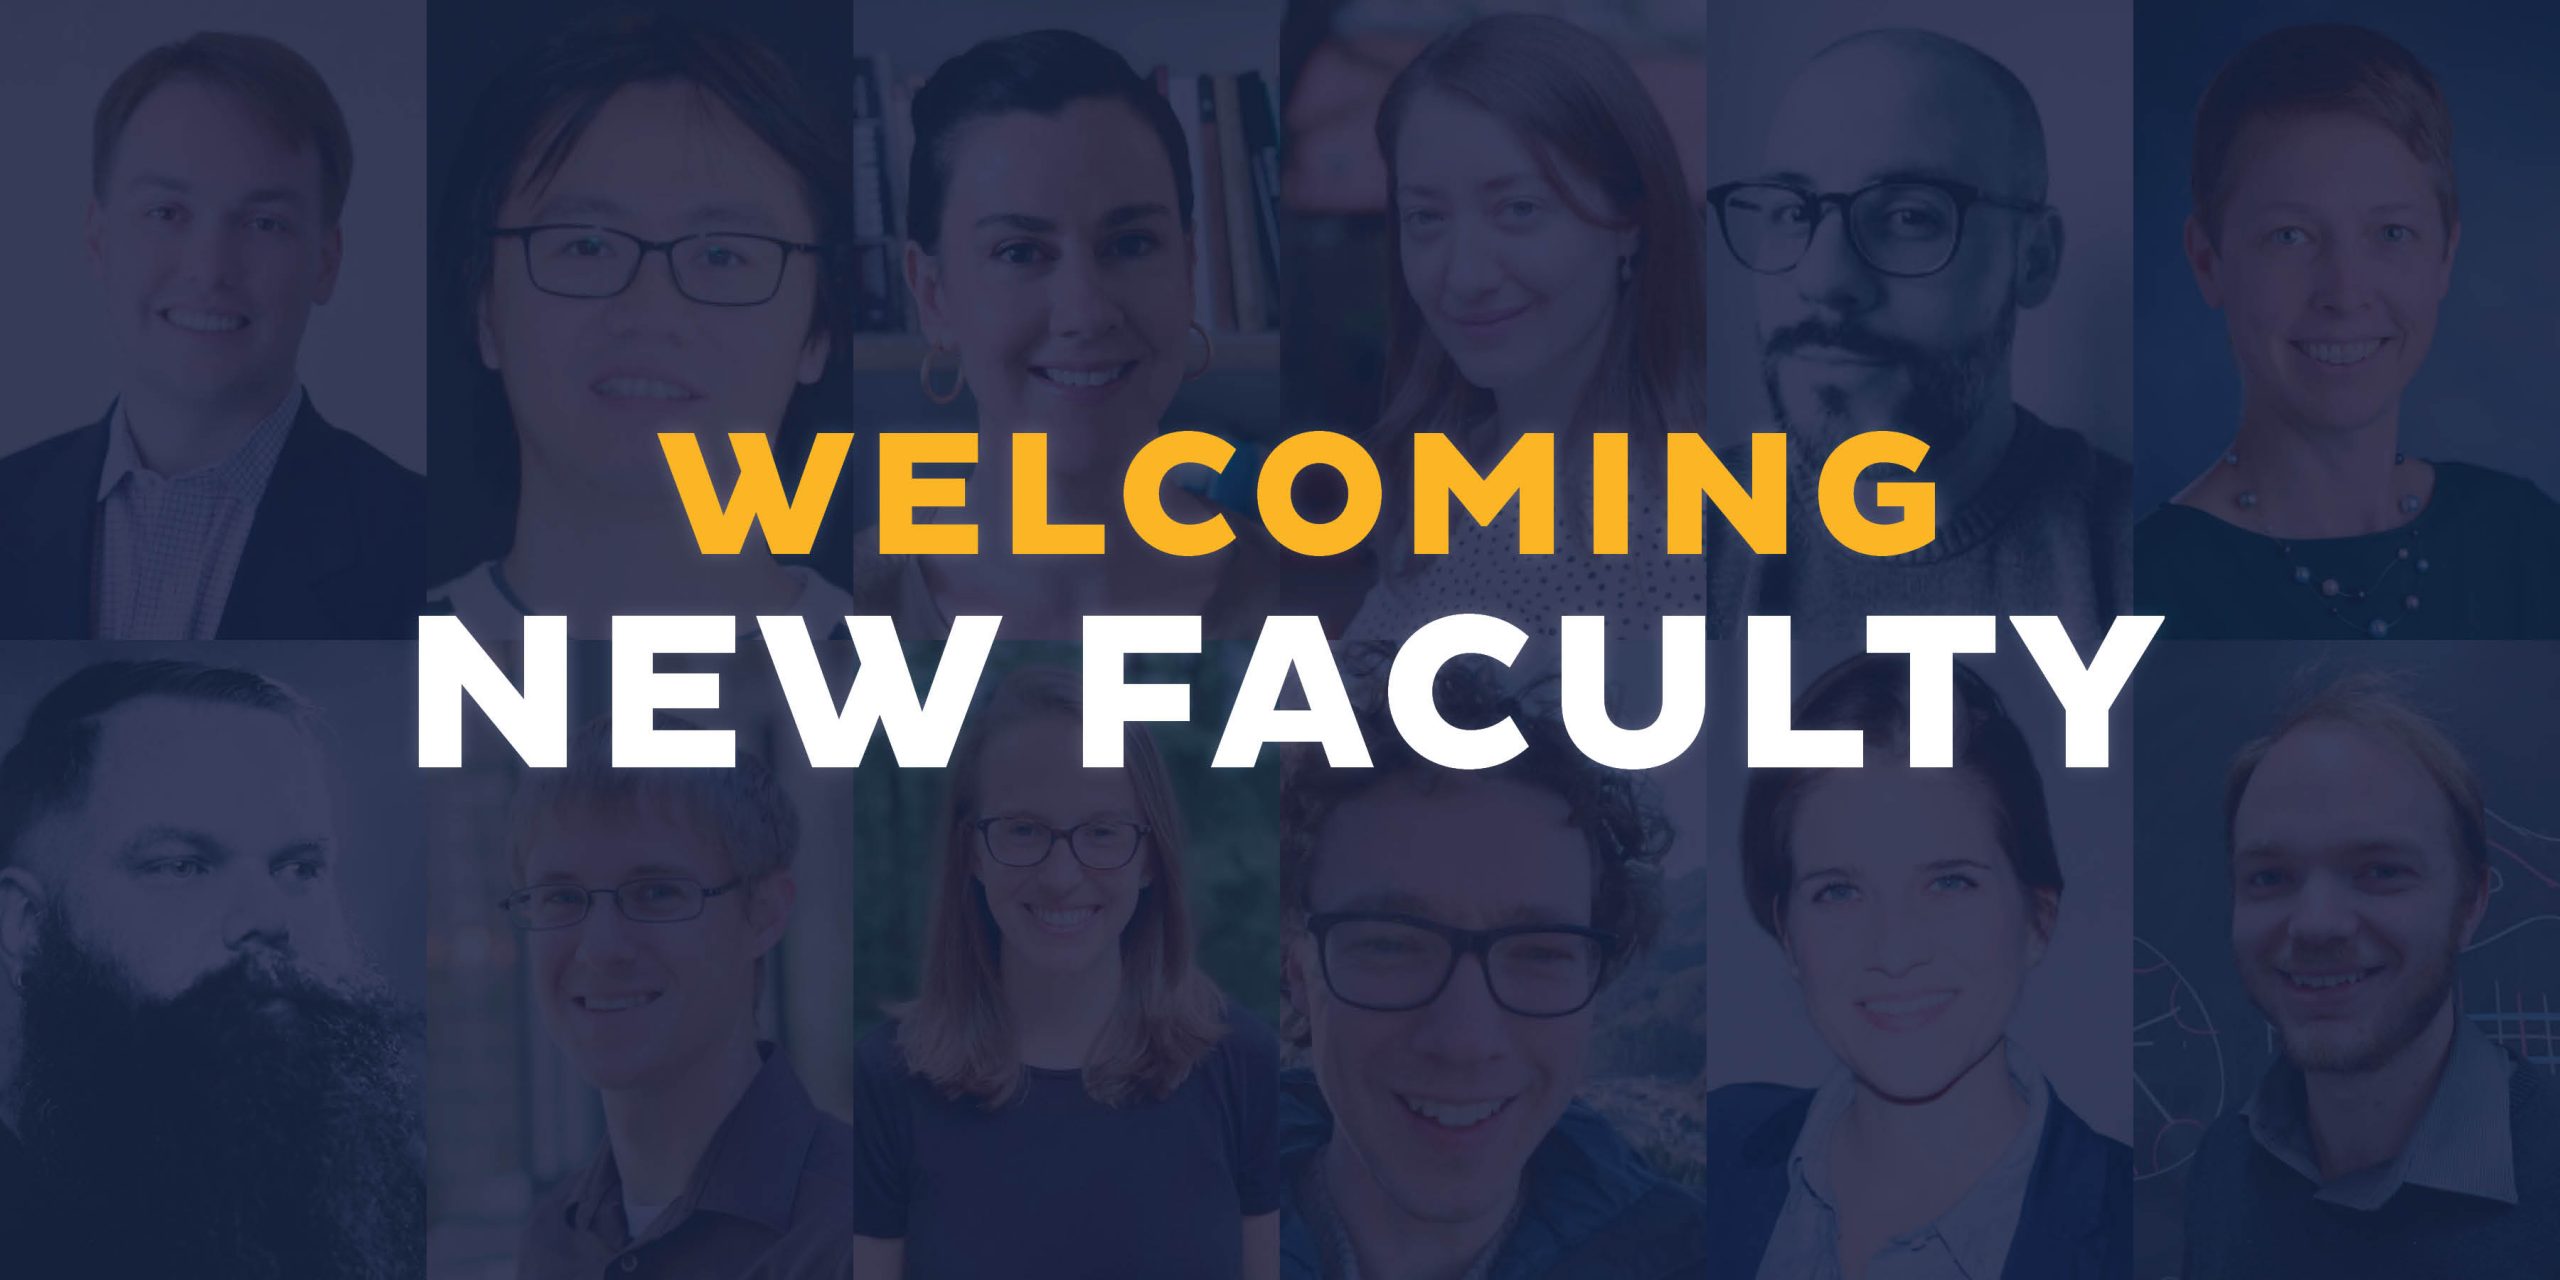 Image of text saying Welcoming new Faculty